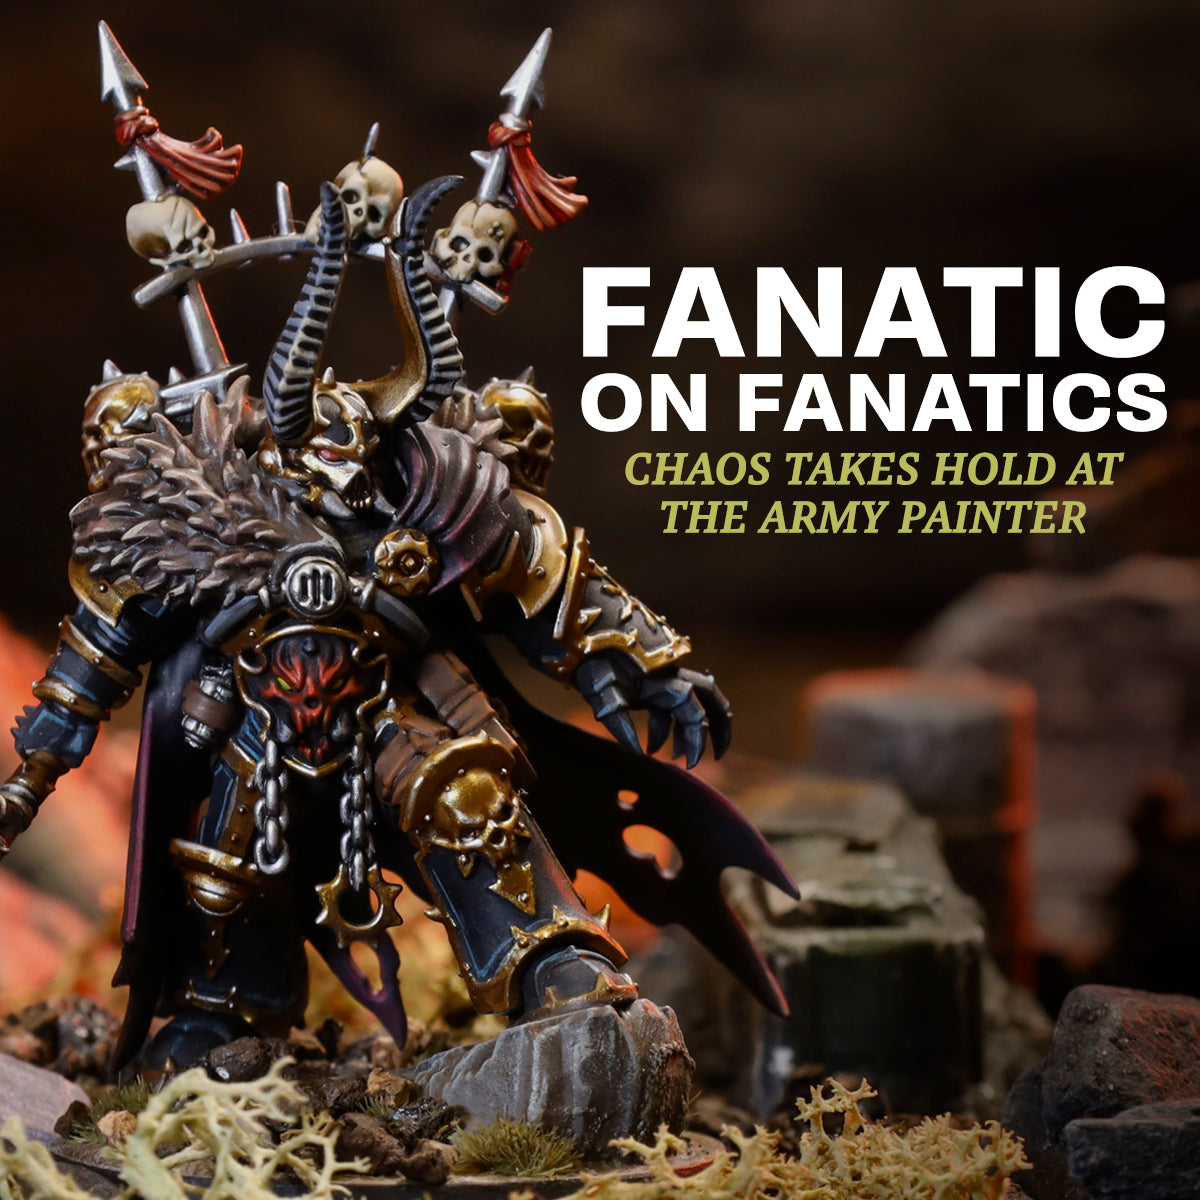 Fanatic on Fanatics: Chaos Takes Hold at The Army Painter